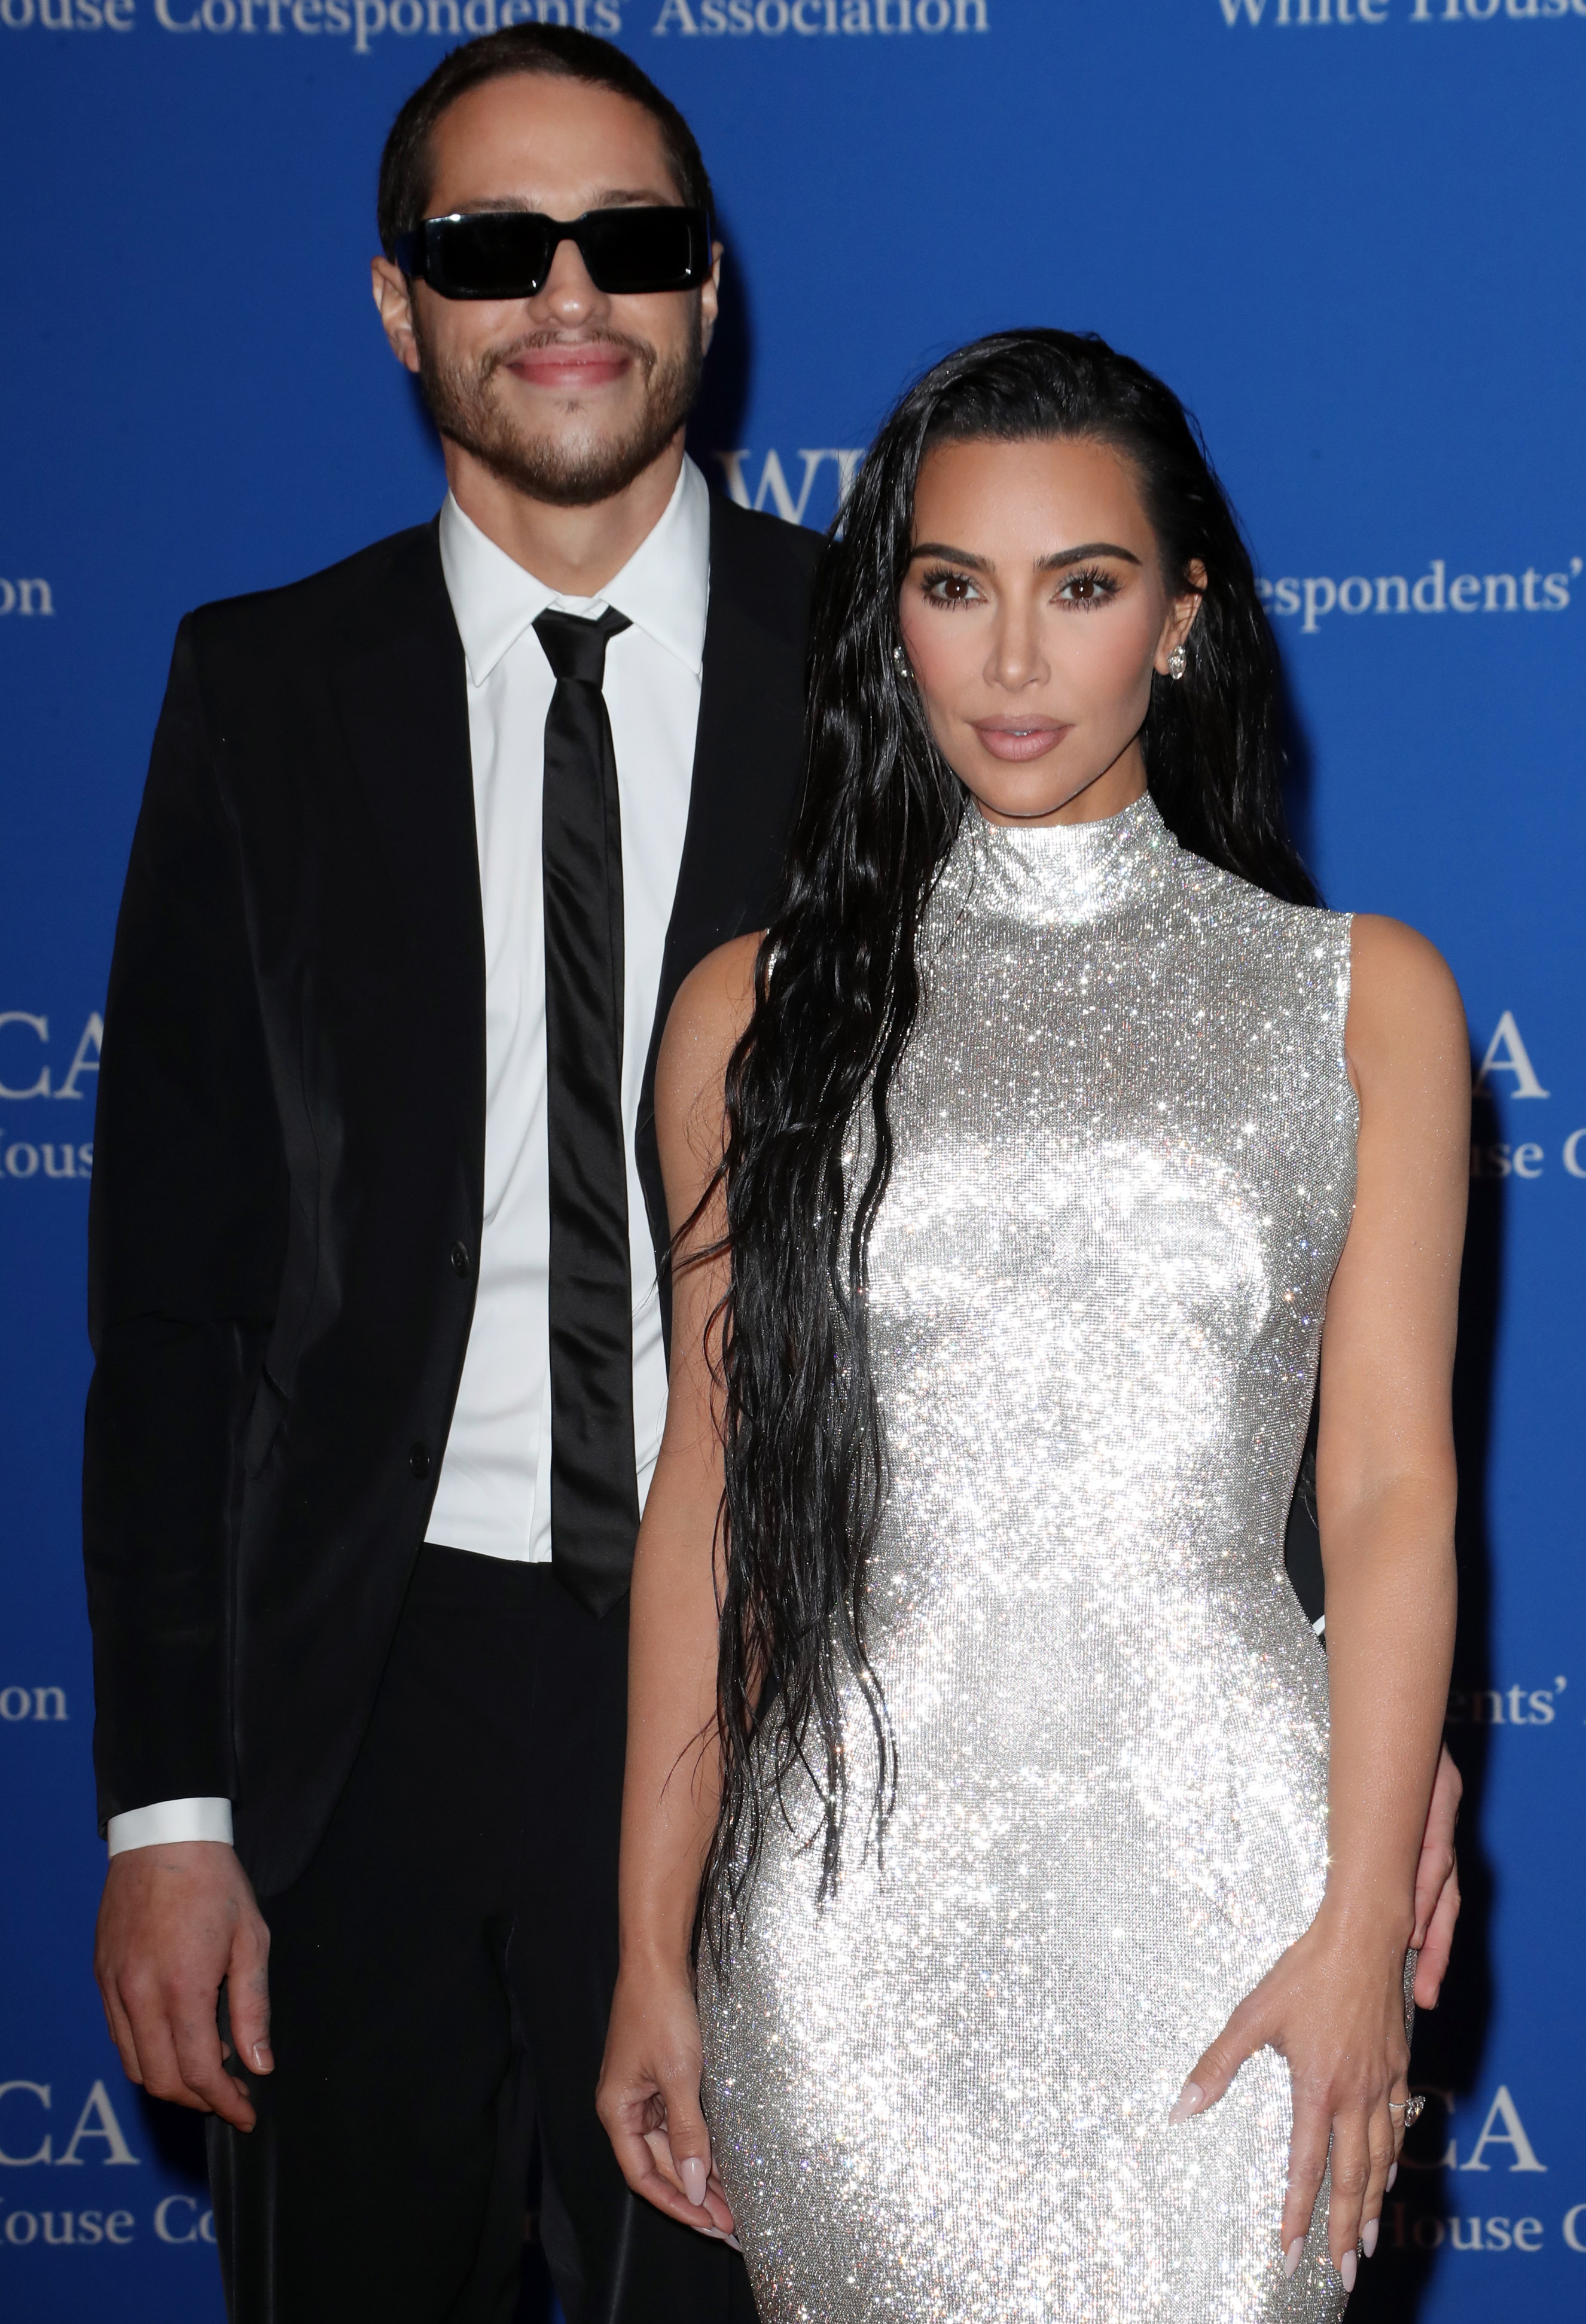 <p>Kim Kardashian told host Amanda Hirsch on her "Not Skinny But Not Fat" podcast that she'd met Pete Davidson before -- in 2019, Kim, third husband Kanye West, Timothee Chalamet and Pete all attended Kid Cudi's birthday dinner -- and they almost exchanged numbers at the <a href="https://www.wonderwall.com/awards-events/2021-met-gala-see-all-the-stars-on-the-red-carpet-496114.gallery">Met Gala in September 2021</a> when they briefly chatted about her upcoming October 2021 hosting gig on Pete's show, "Saturday Night Live." But things turned awkward. "He was like, 'Take my number if you need anything.' And I had gloves on [that were attached to my Balenciaga ensemble] and I couldn't get in my phone with the gloves, and I was like, 'Oh I have gloves! And I can't -- and he was like, 'All right, cool,' and walked away," she remembered. </p><p>A month later, they saw each other again at a dress rehearsal for an "SNL" sketch where he played Aladdin and she was Princess Jasmine. When they kissed in the sketch, "it was just a vibe," Kim said on the June 1 episode of "The Kardashians." "And I was like ... maybe I just need to try something different. But Pete does not come to my afterparty. Everyone was at my afterparty. He does not give me the time of day." She kept thinking about it, and "a few days later," she explained, "I called the producer at 'SNL' and I was like, 'Hey, do you have Pete's number?' And they were like, 'Yeah.' And I text him. I wasn't even thinking like, 'Oh my god, I'm going to be in a relationship with him.' I was just thinking like, heard about this BDE, need to get out there, like, I need to just like, jump-start my... I was just basically DTF," she confessed. </p><p>Later that month, they were spotted riding roller coasters together at a theme park and soon, things got serious. "Pete has got to be literally the best human being I've ever met. Like, [he has] the best heart," Kim said. "People always say like, 'Oh he's so funny and it has to do with how funny he is. That's like, fourth on my list of why I like him." Kim and Pete split in August 2022 after nine months of dating.</p>